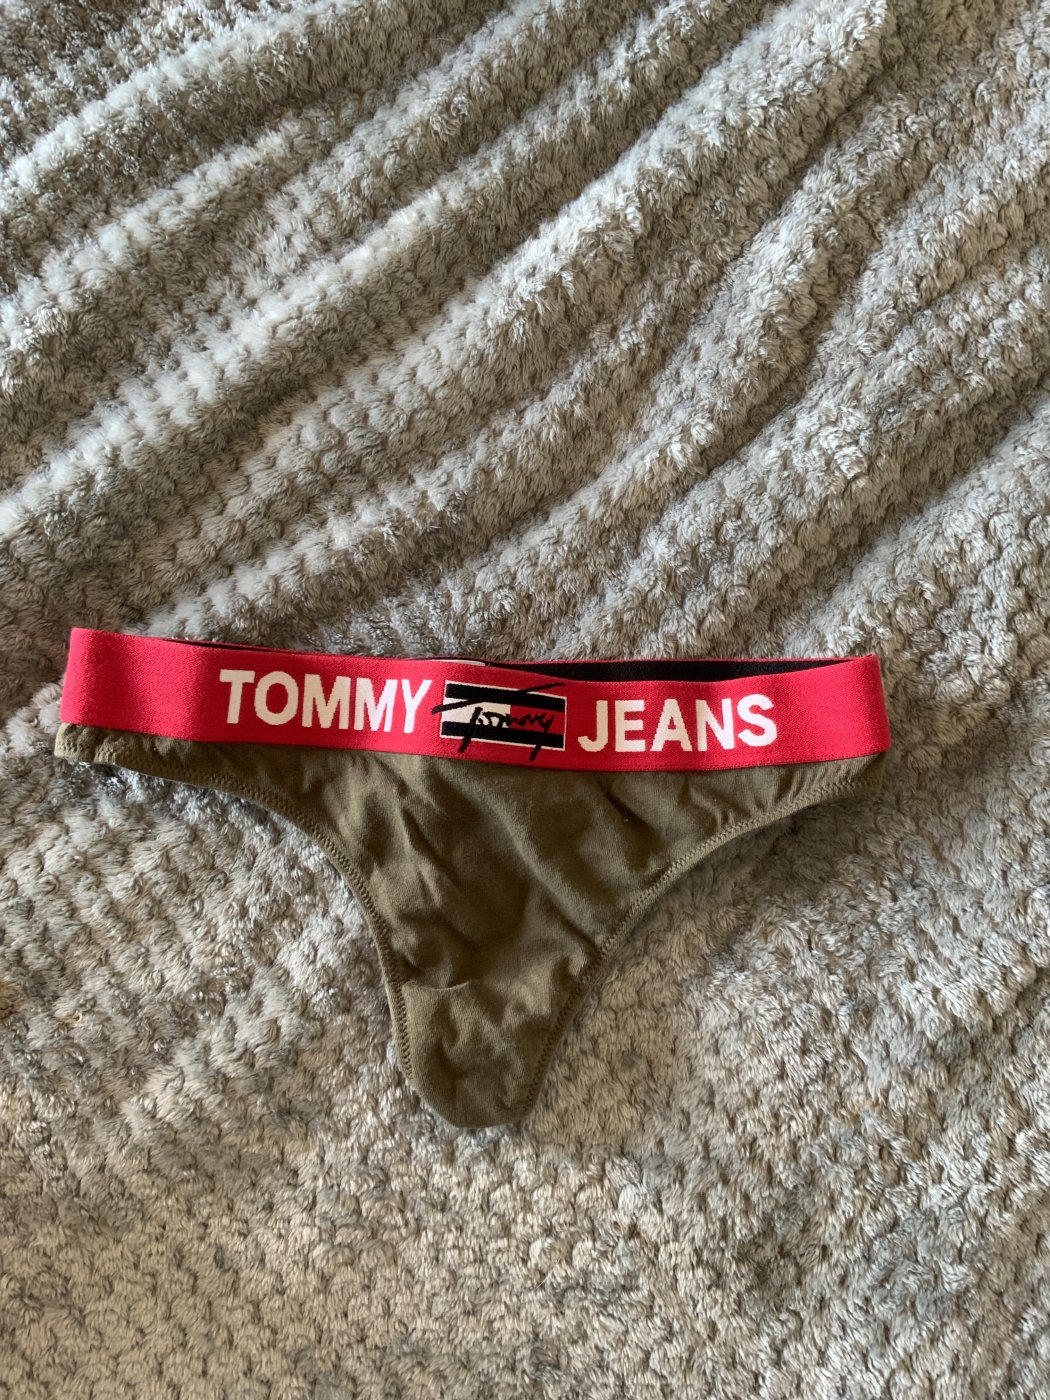 String Tommy jeans